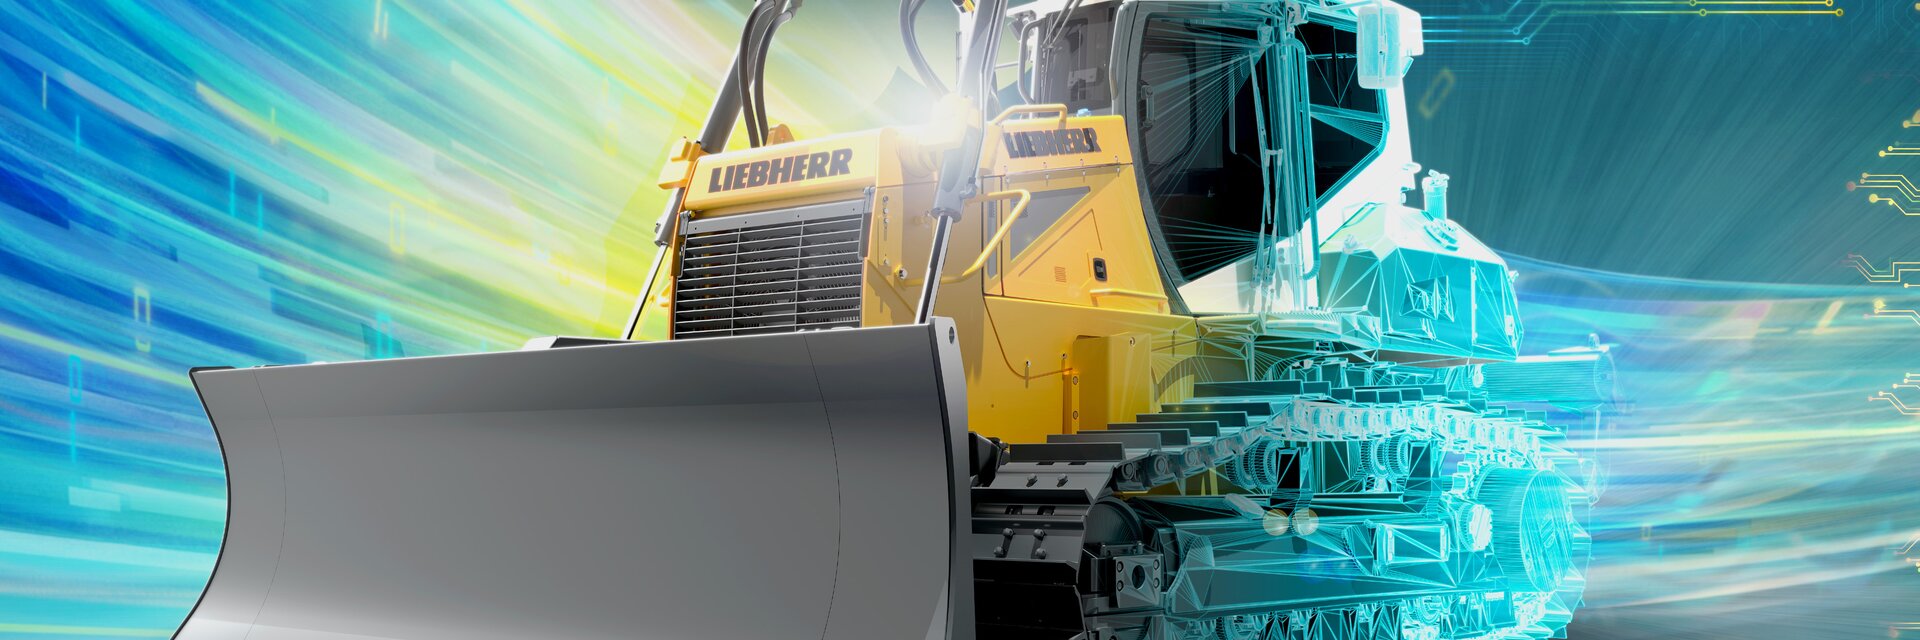 Case Study: Digital Product Launcher for Liebherr - Impression #1